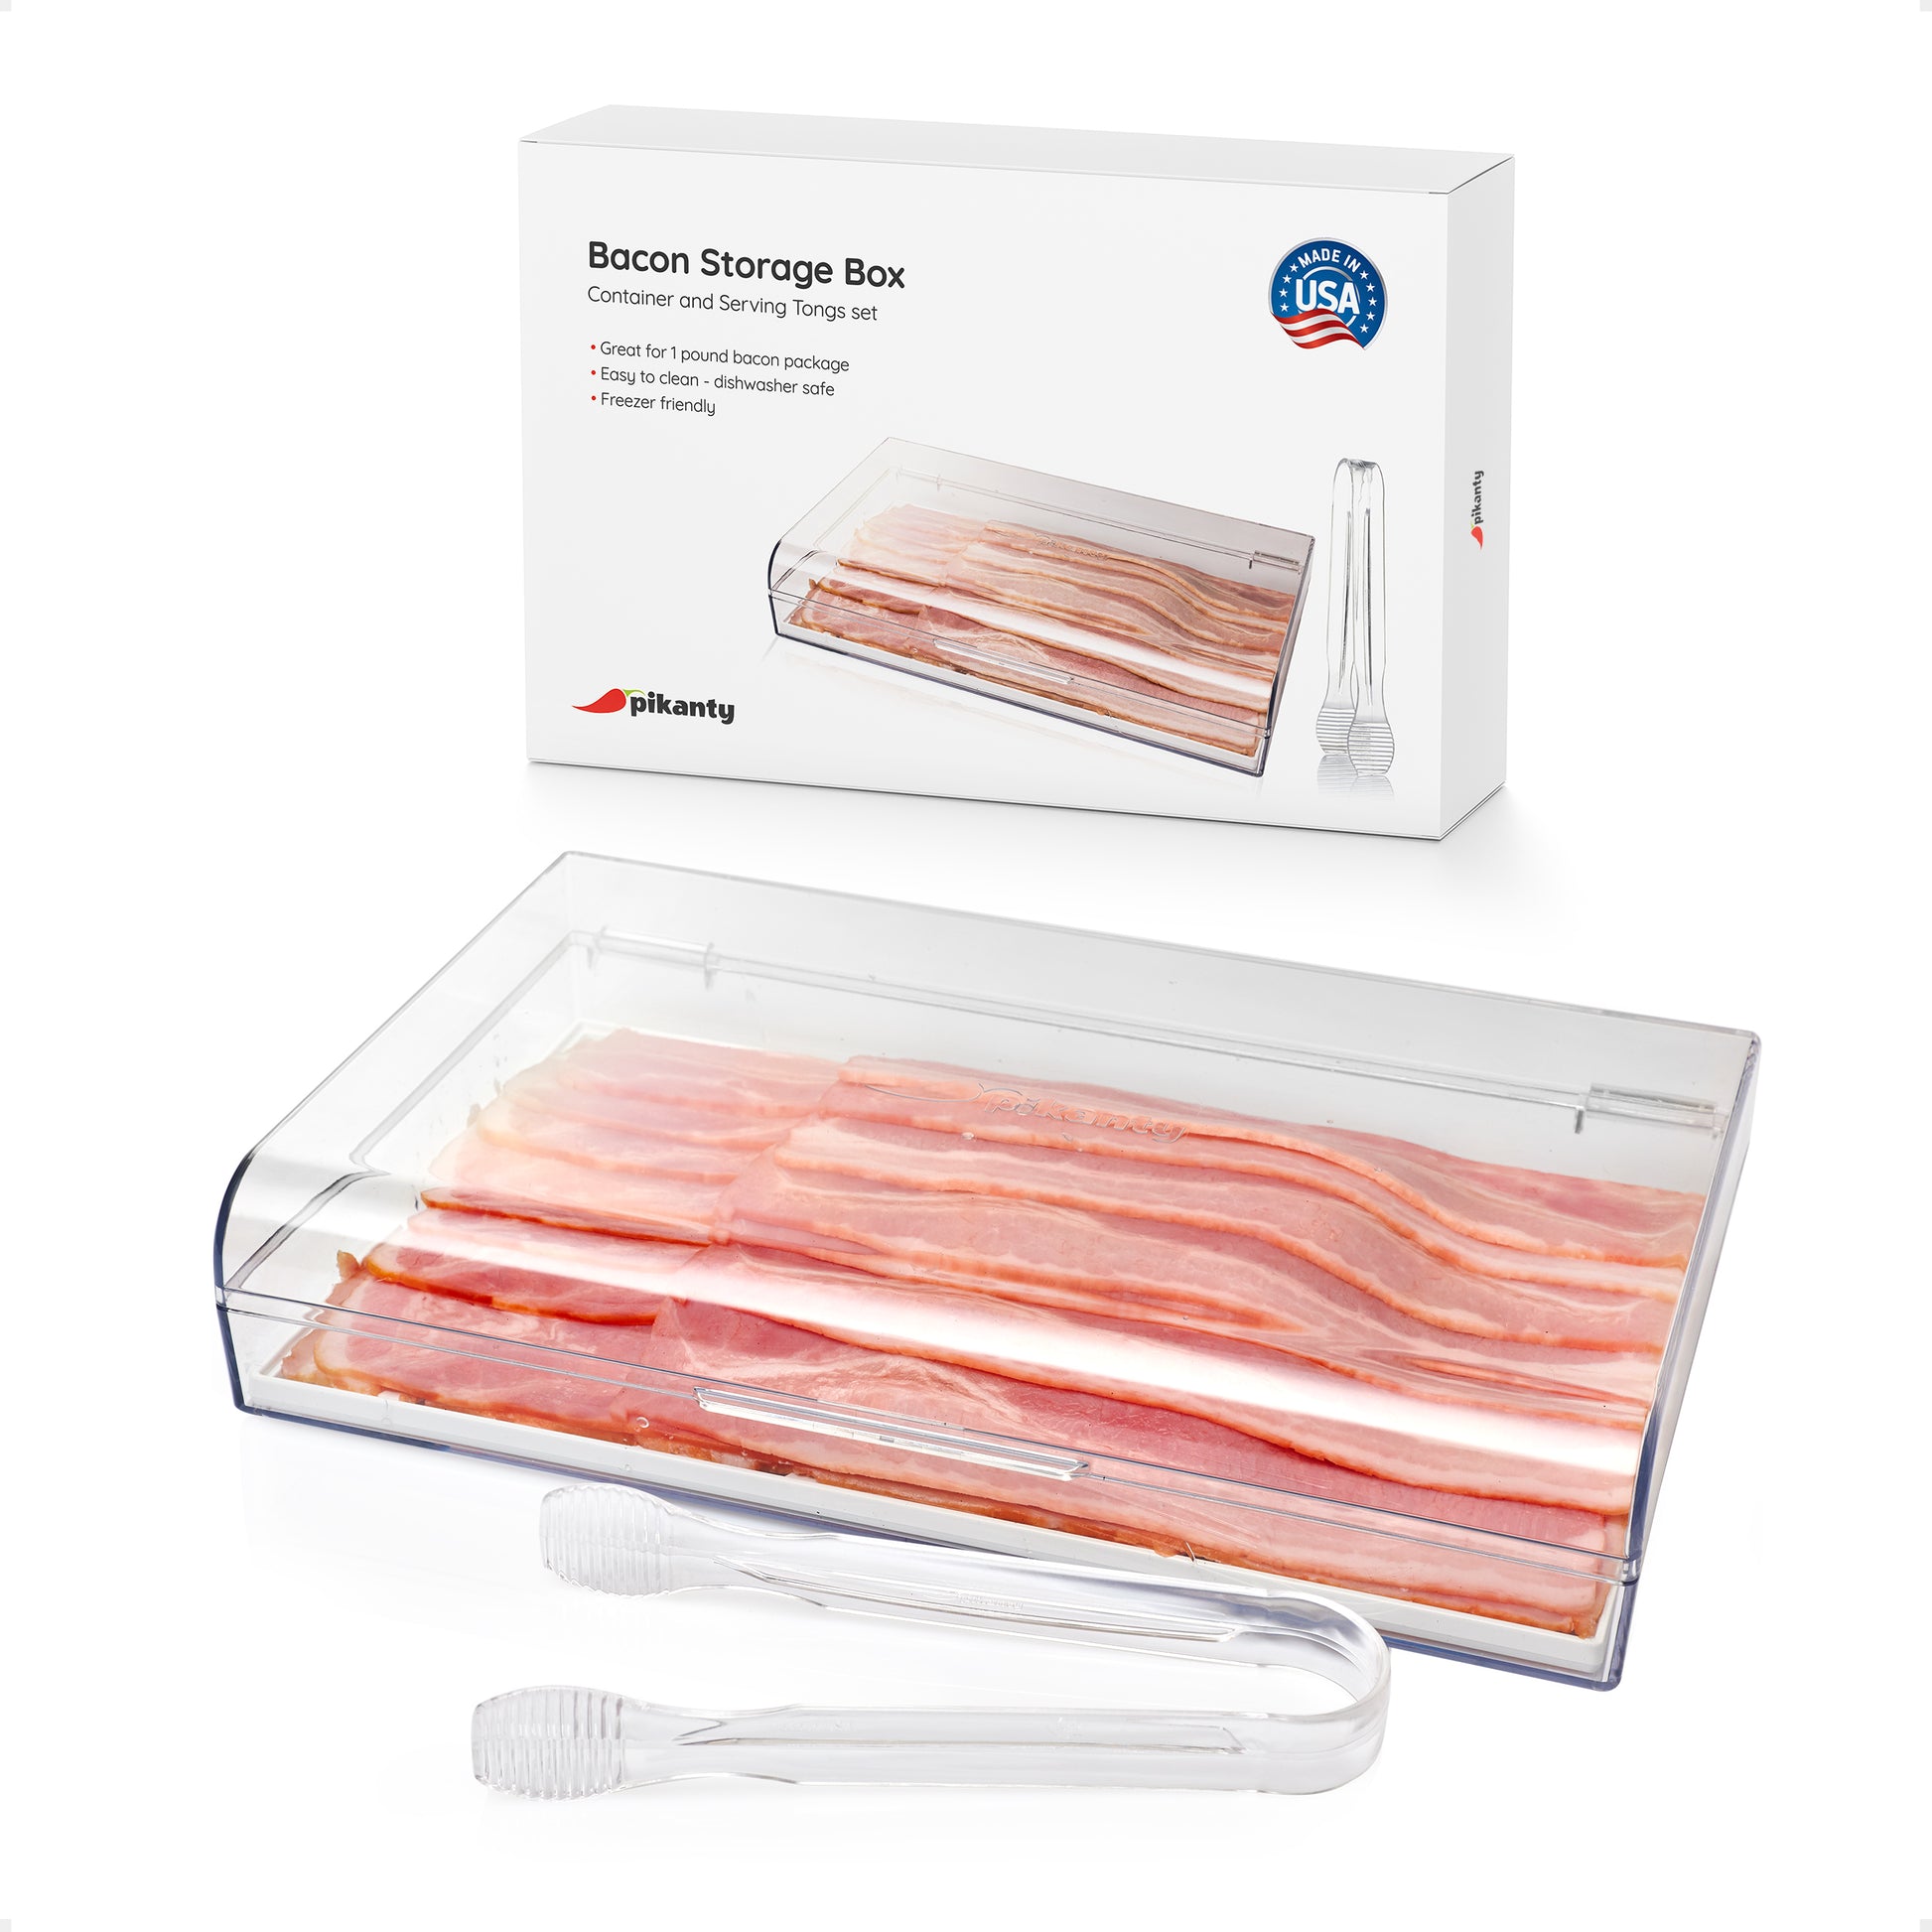  Kitchen Discovery Stay Fresh Bacon Keeper 1lb Plastic Bacon  Container for Refrigerator Preserves Freshness and Prevents Spoilage – No  Mess Bacon Storage Replaces Greasy Packaging: Home & Kitchen